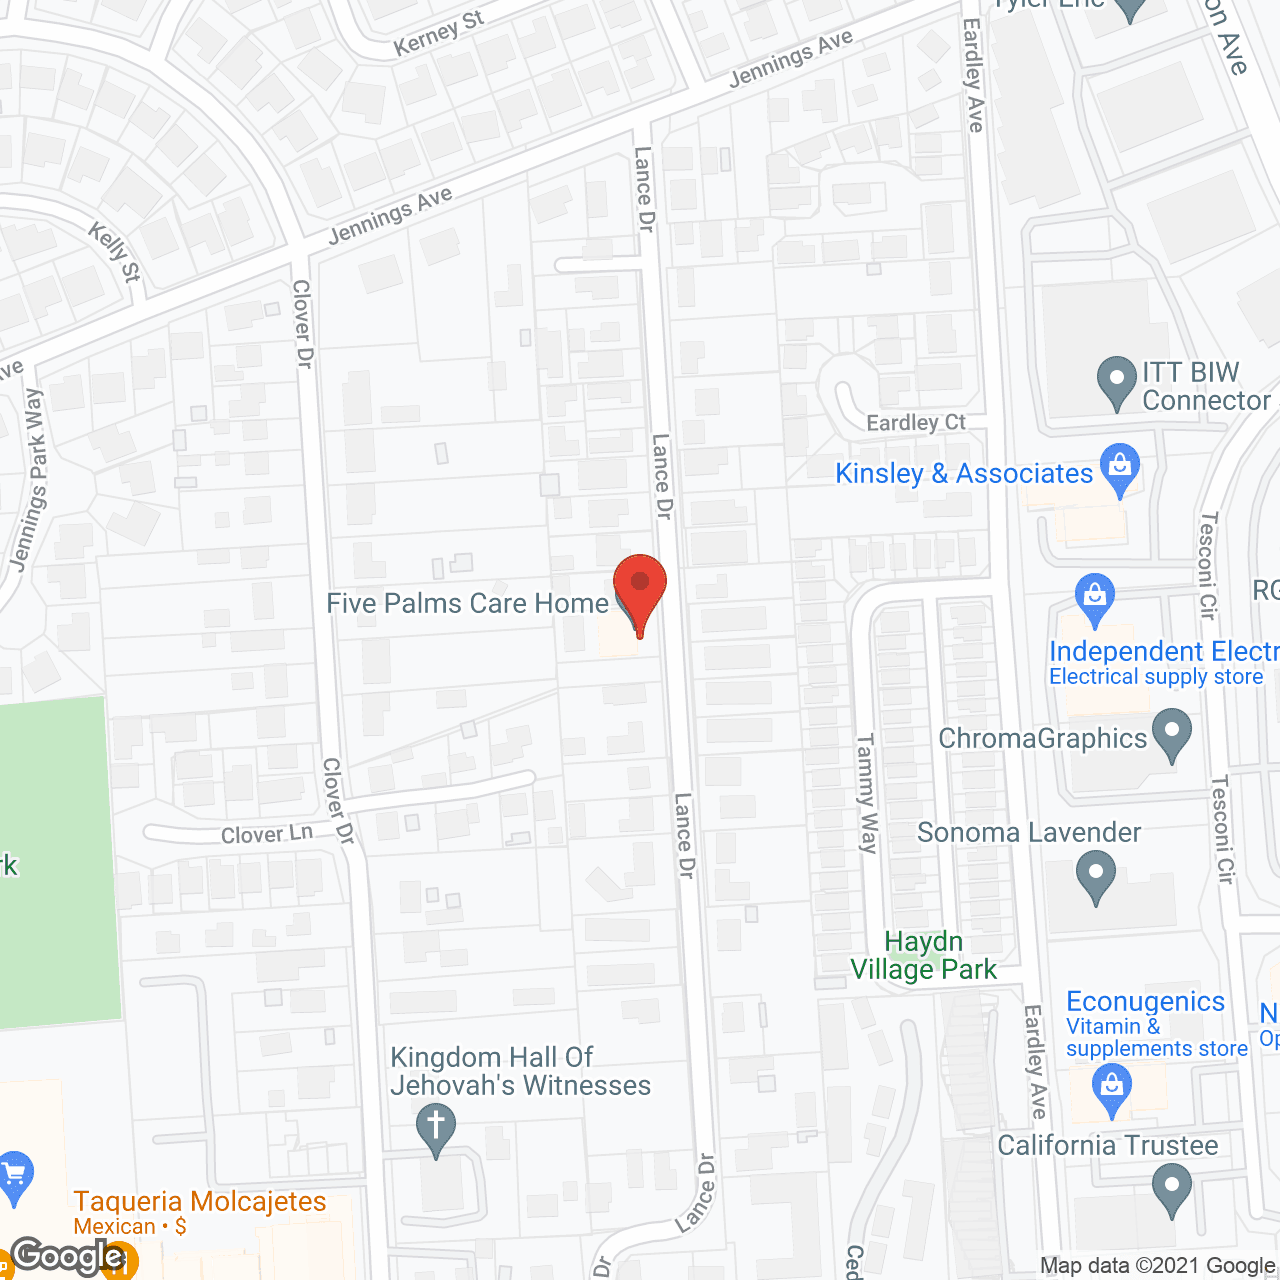 Five Palms Care Home in google map